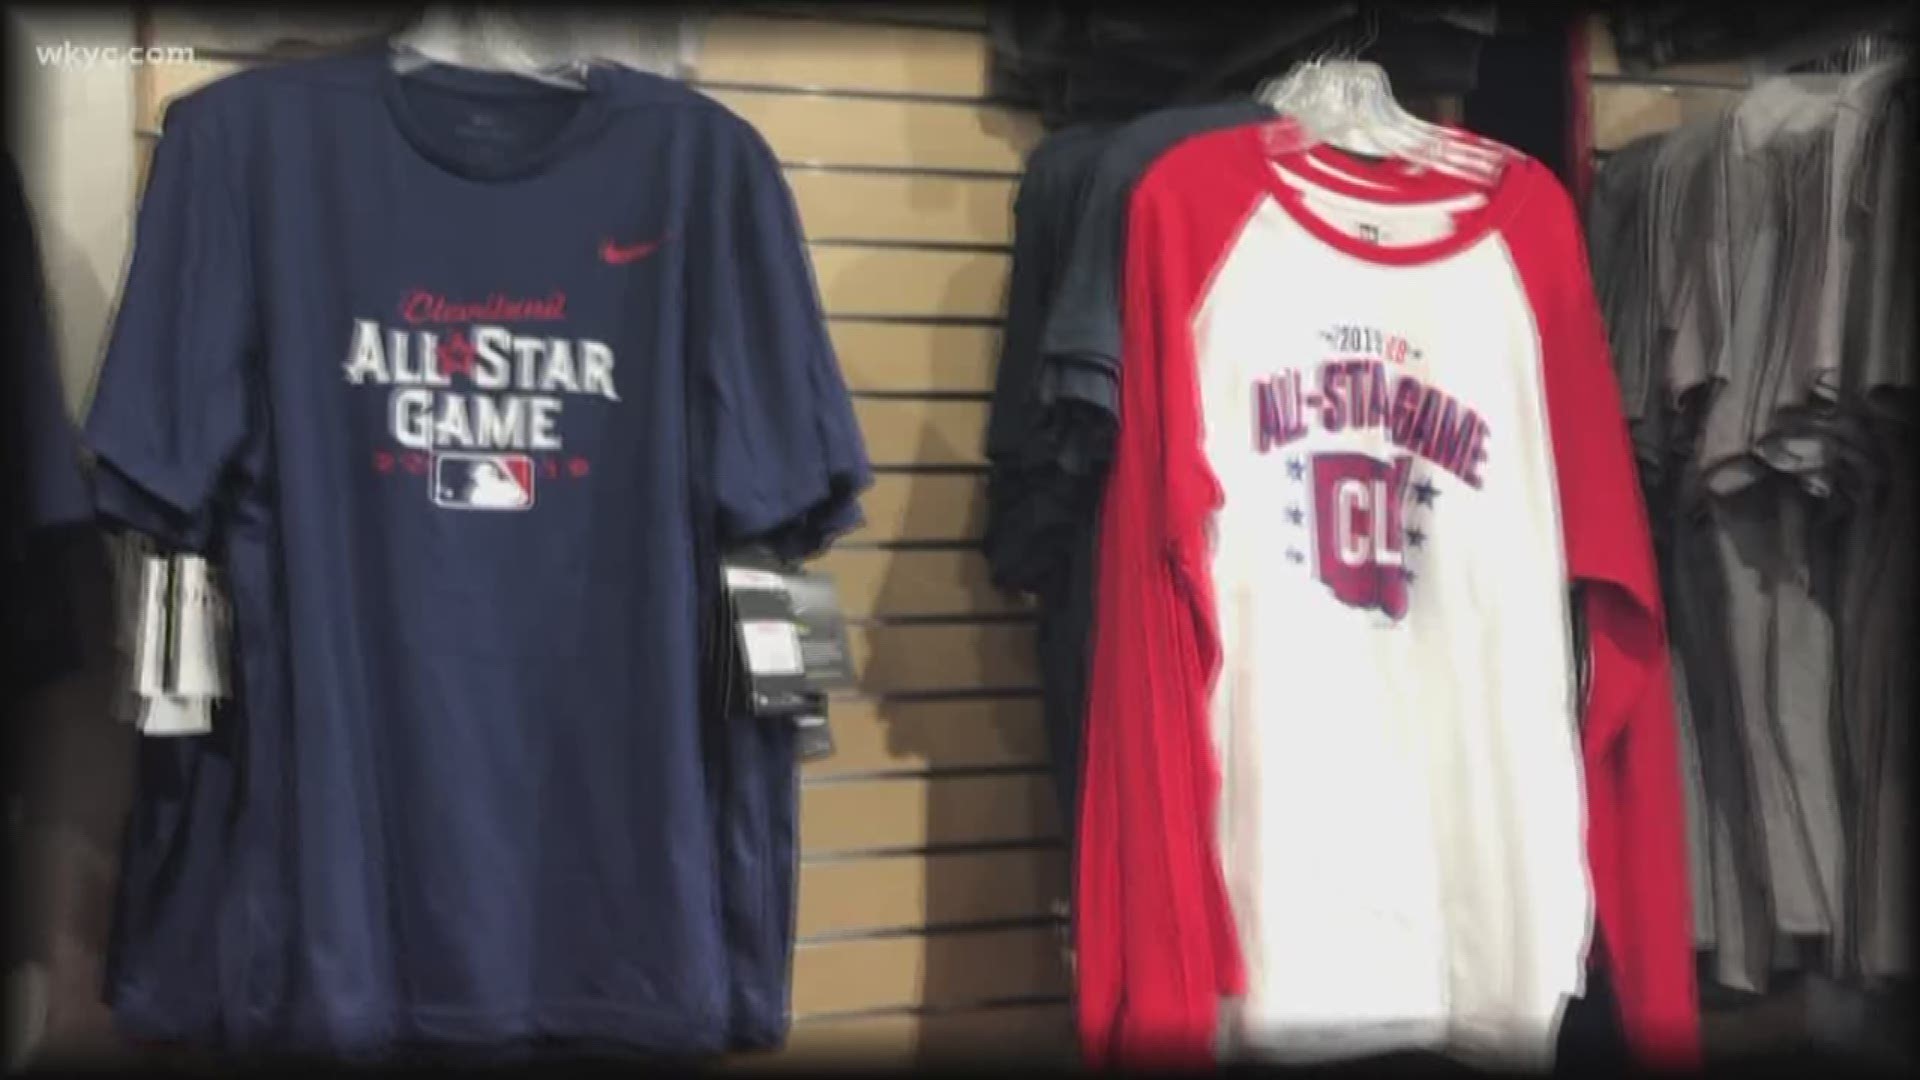 July 8, 2019: Are you looking for a special keepsake from the MLB All-Star Game festivities in Cleveland? We've got you covered. Jasmine Monroe searched the city to find the coolest souvenirs from T-shirts to baseball hats to wine and special sweet treats.